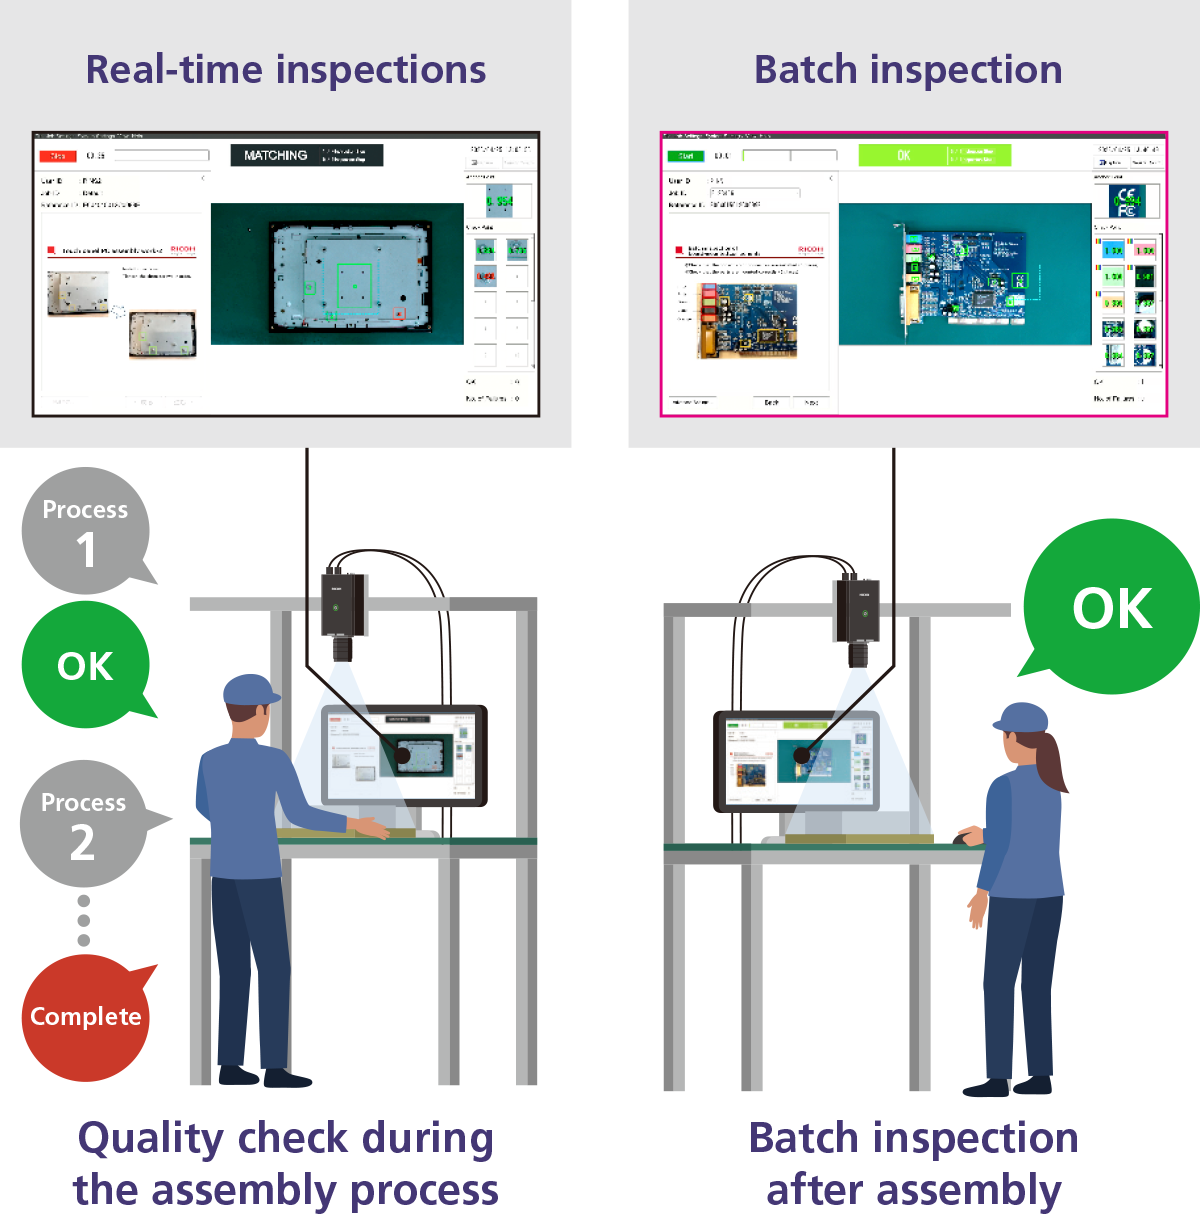 Digitalization of visual inspections helps maintain consistency